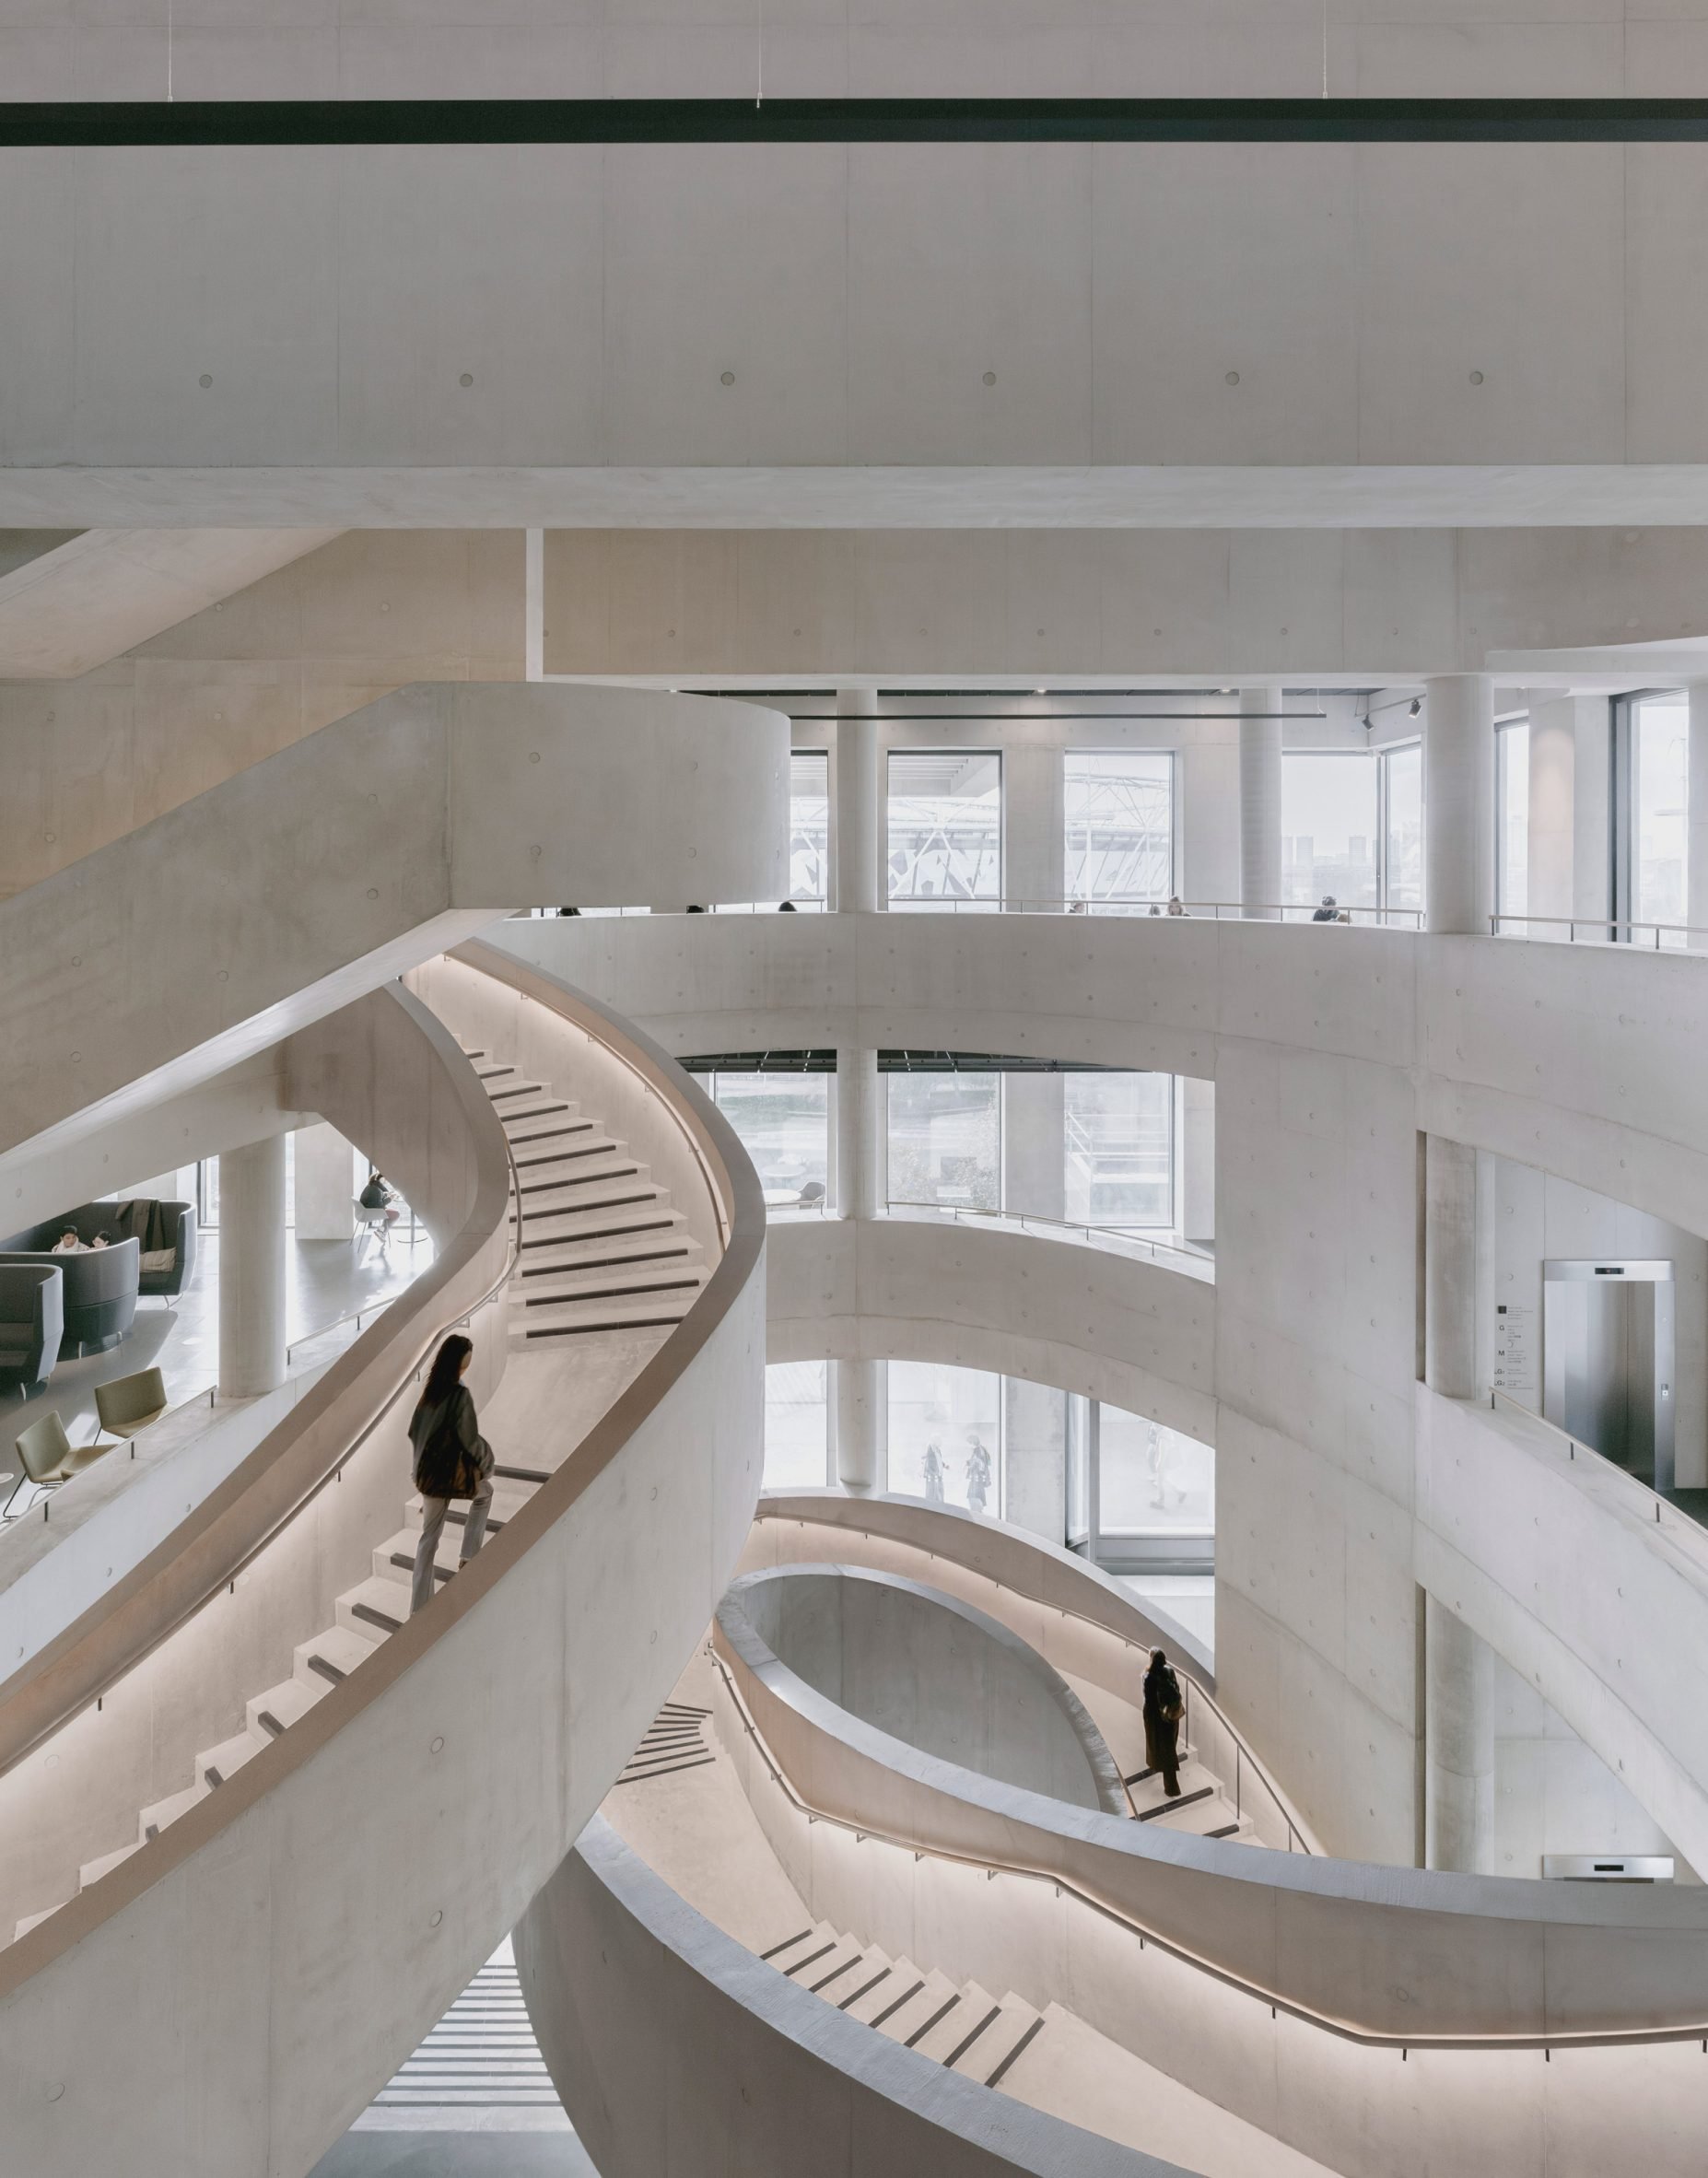 Concrete staircase within London College of Fashion campus in Stratford